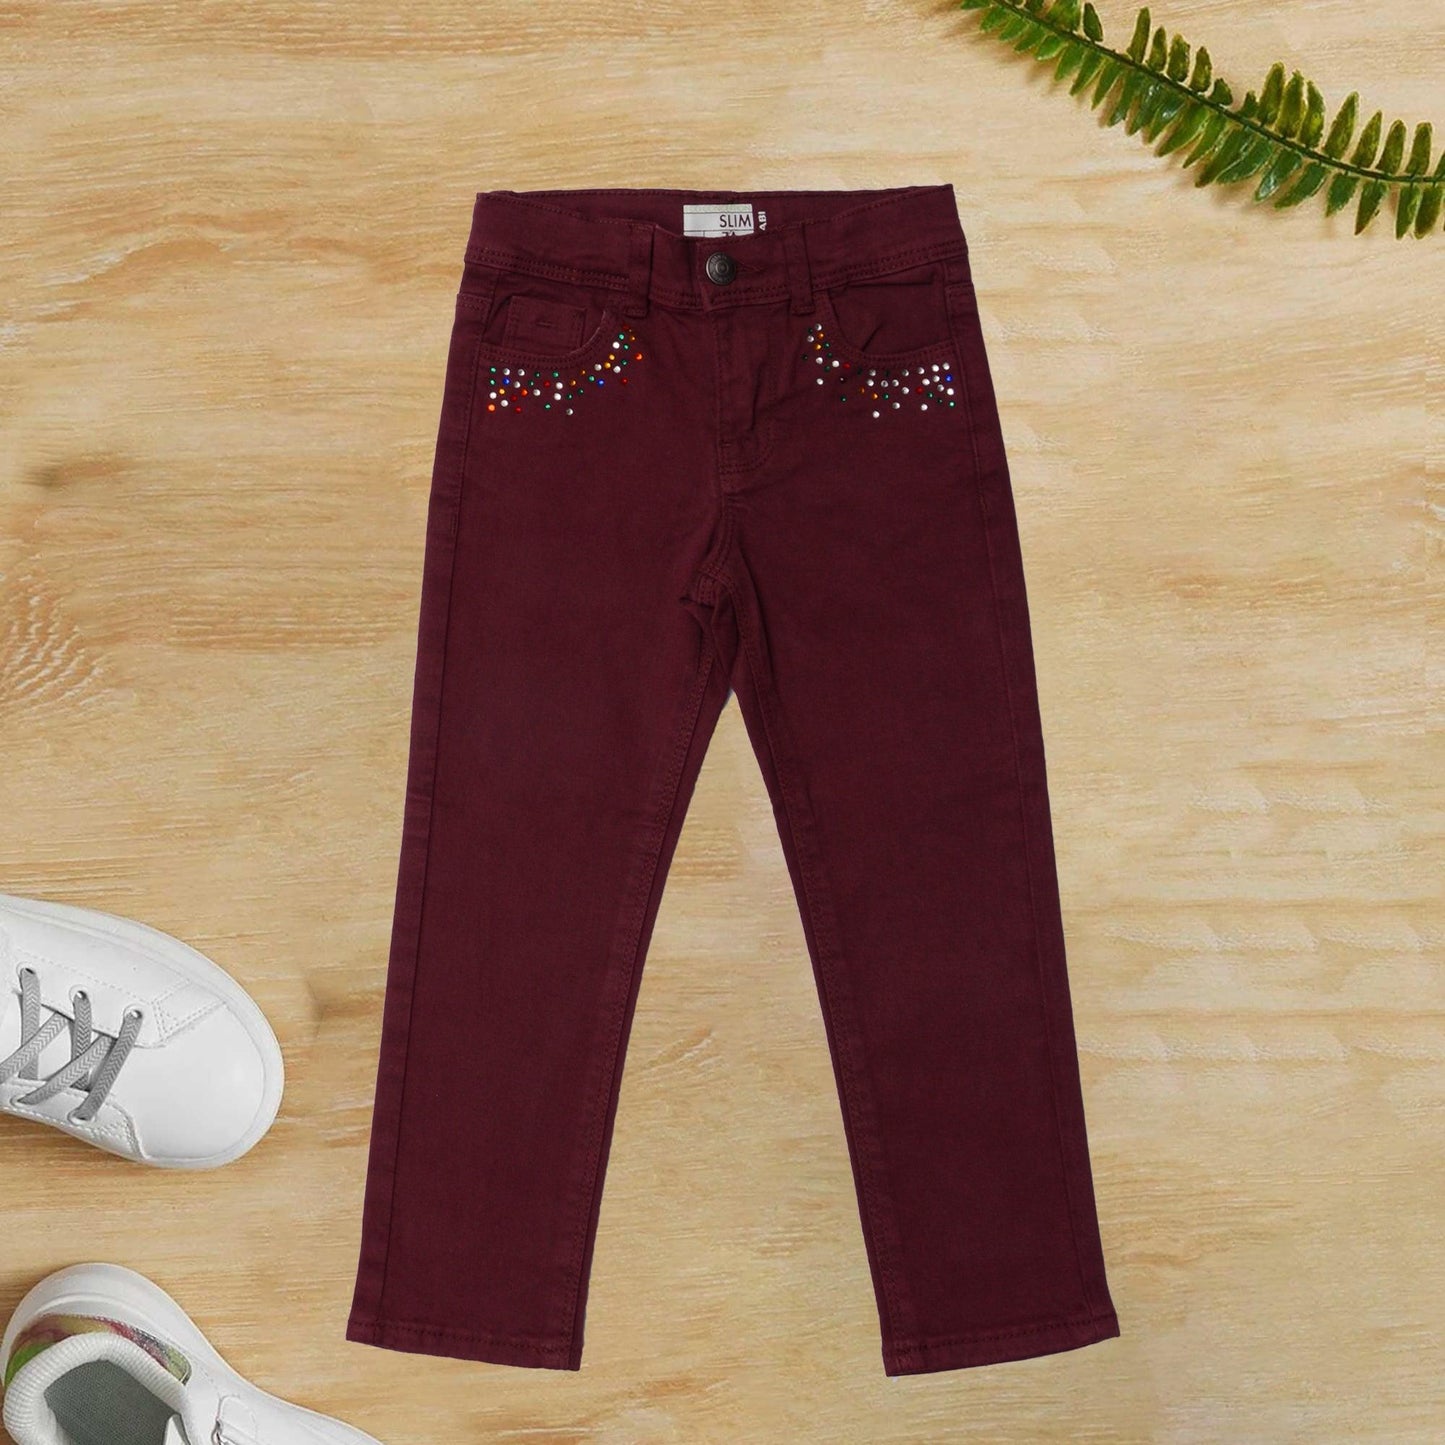 Blood Red Cotton pants for Girls - Miniwears